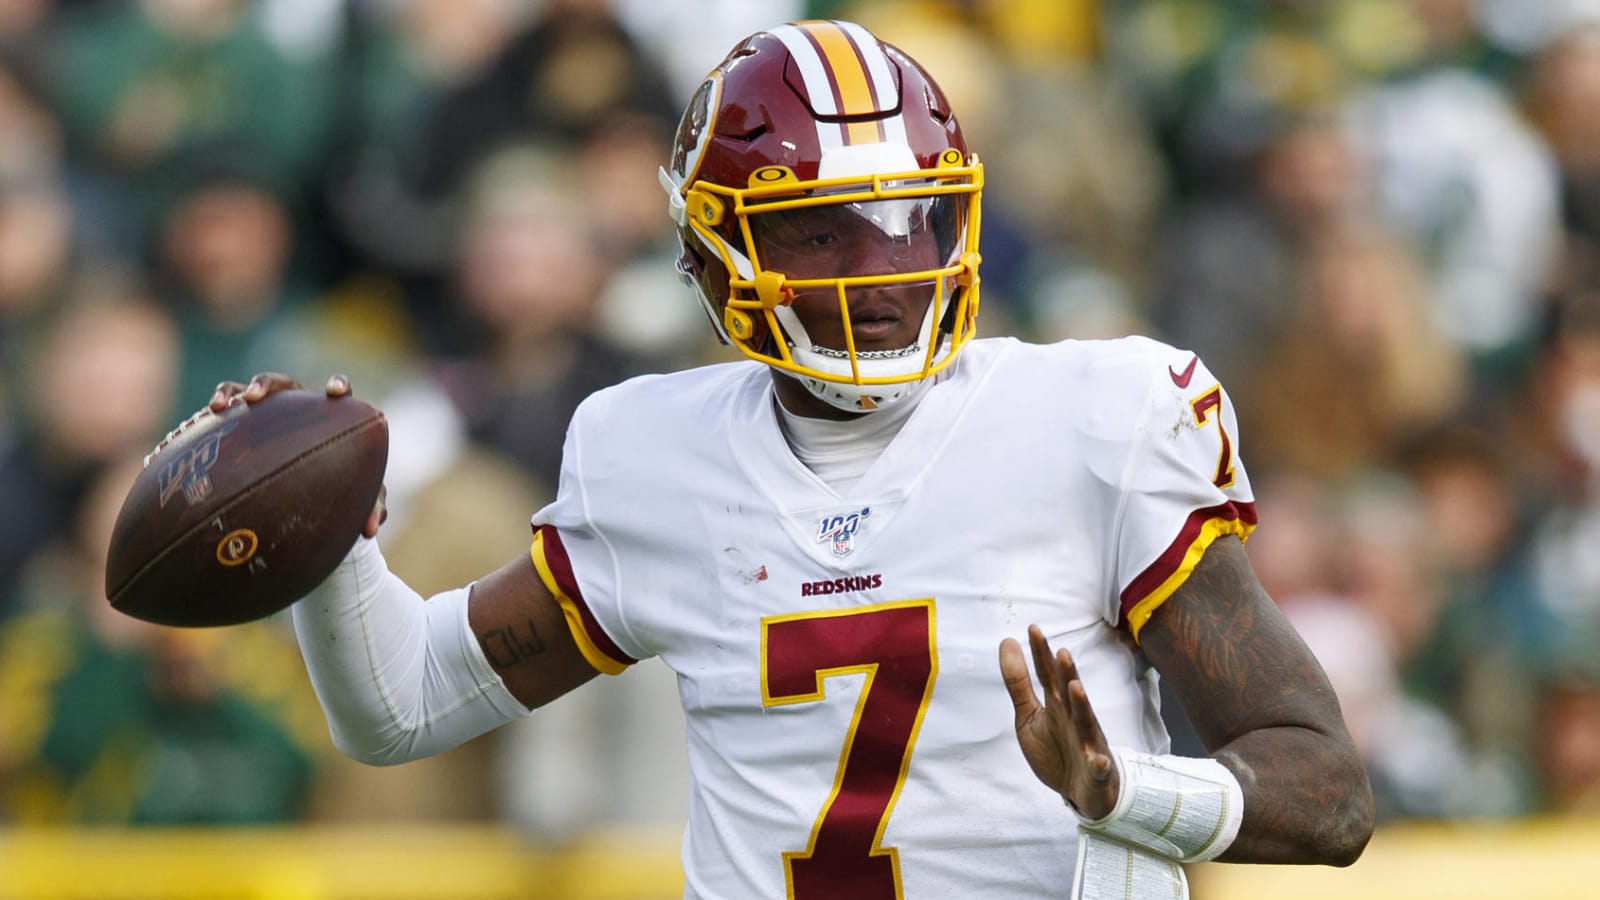 DeAngelo Hall doesn't think Dwayne Haskins has temperament to win starting job in Washington